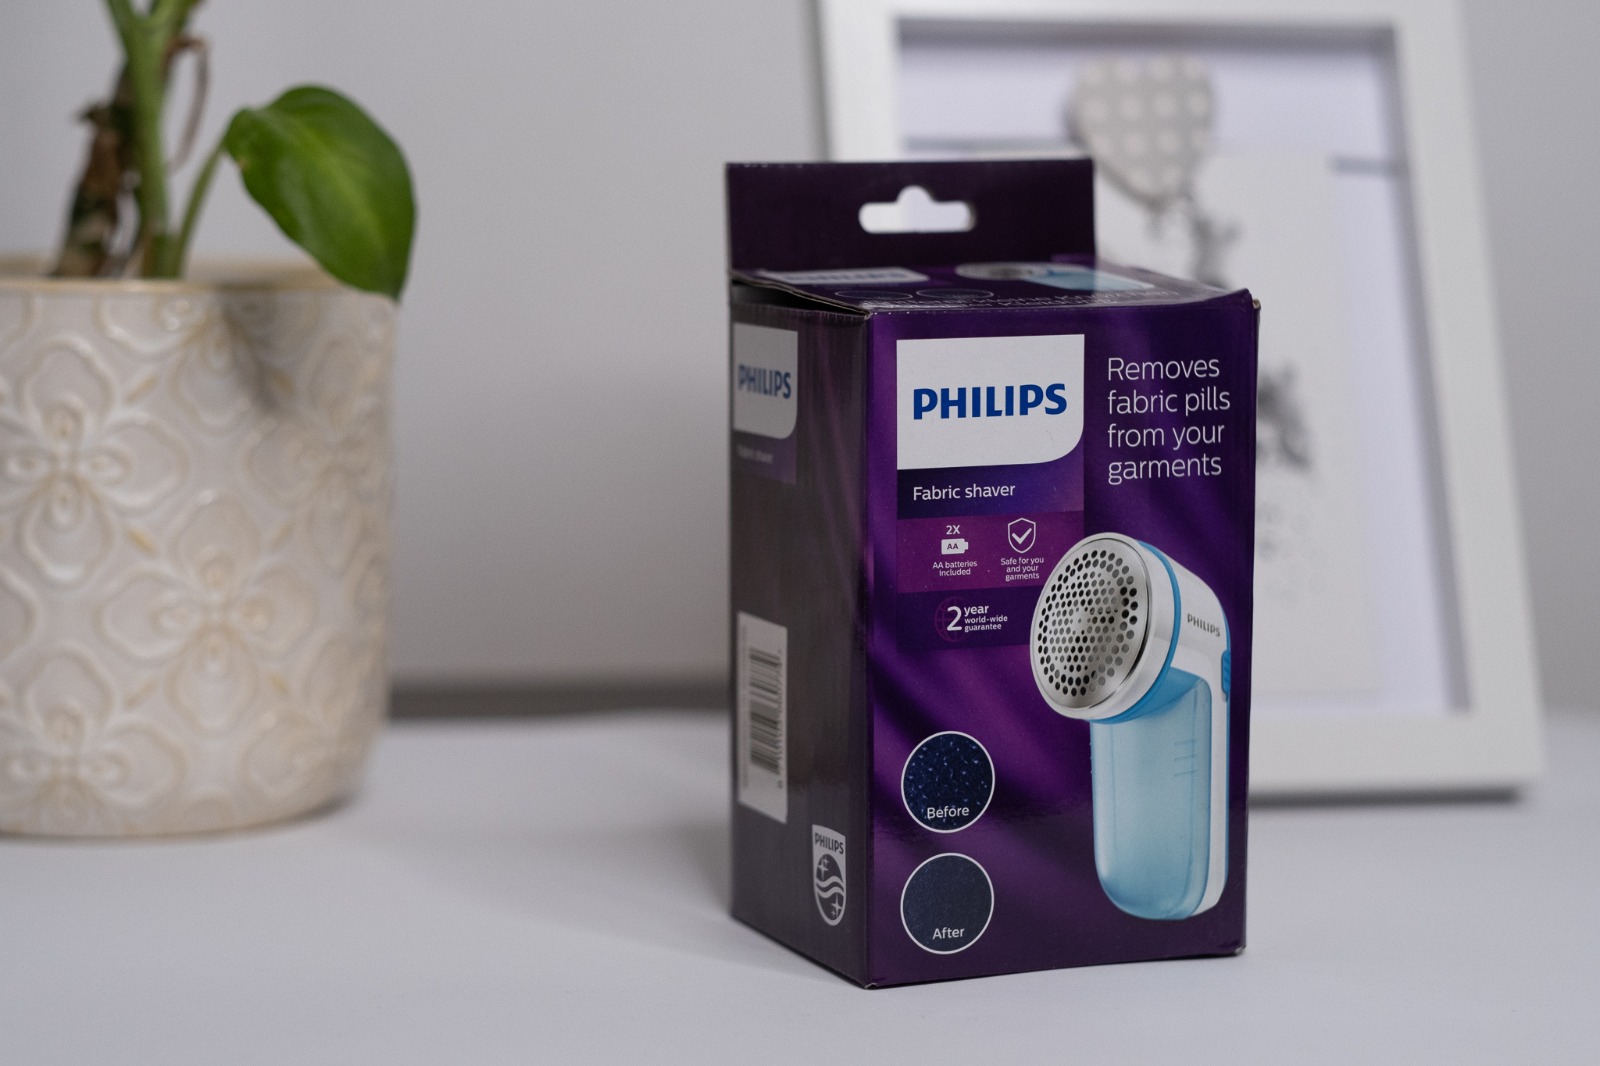 Philips fabric shaver review - M BLAGA